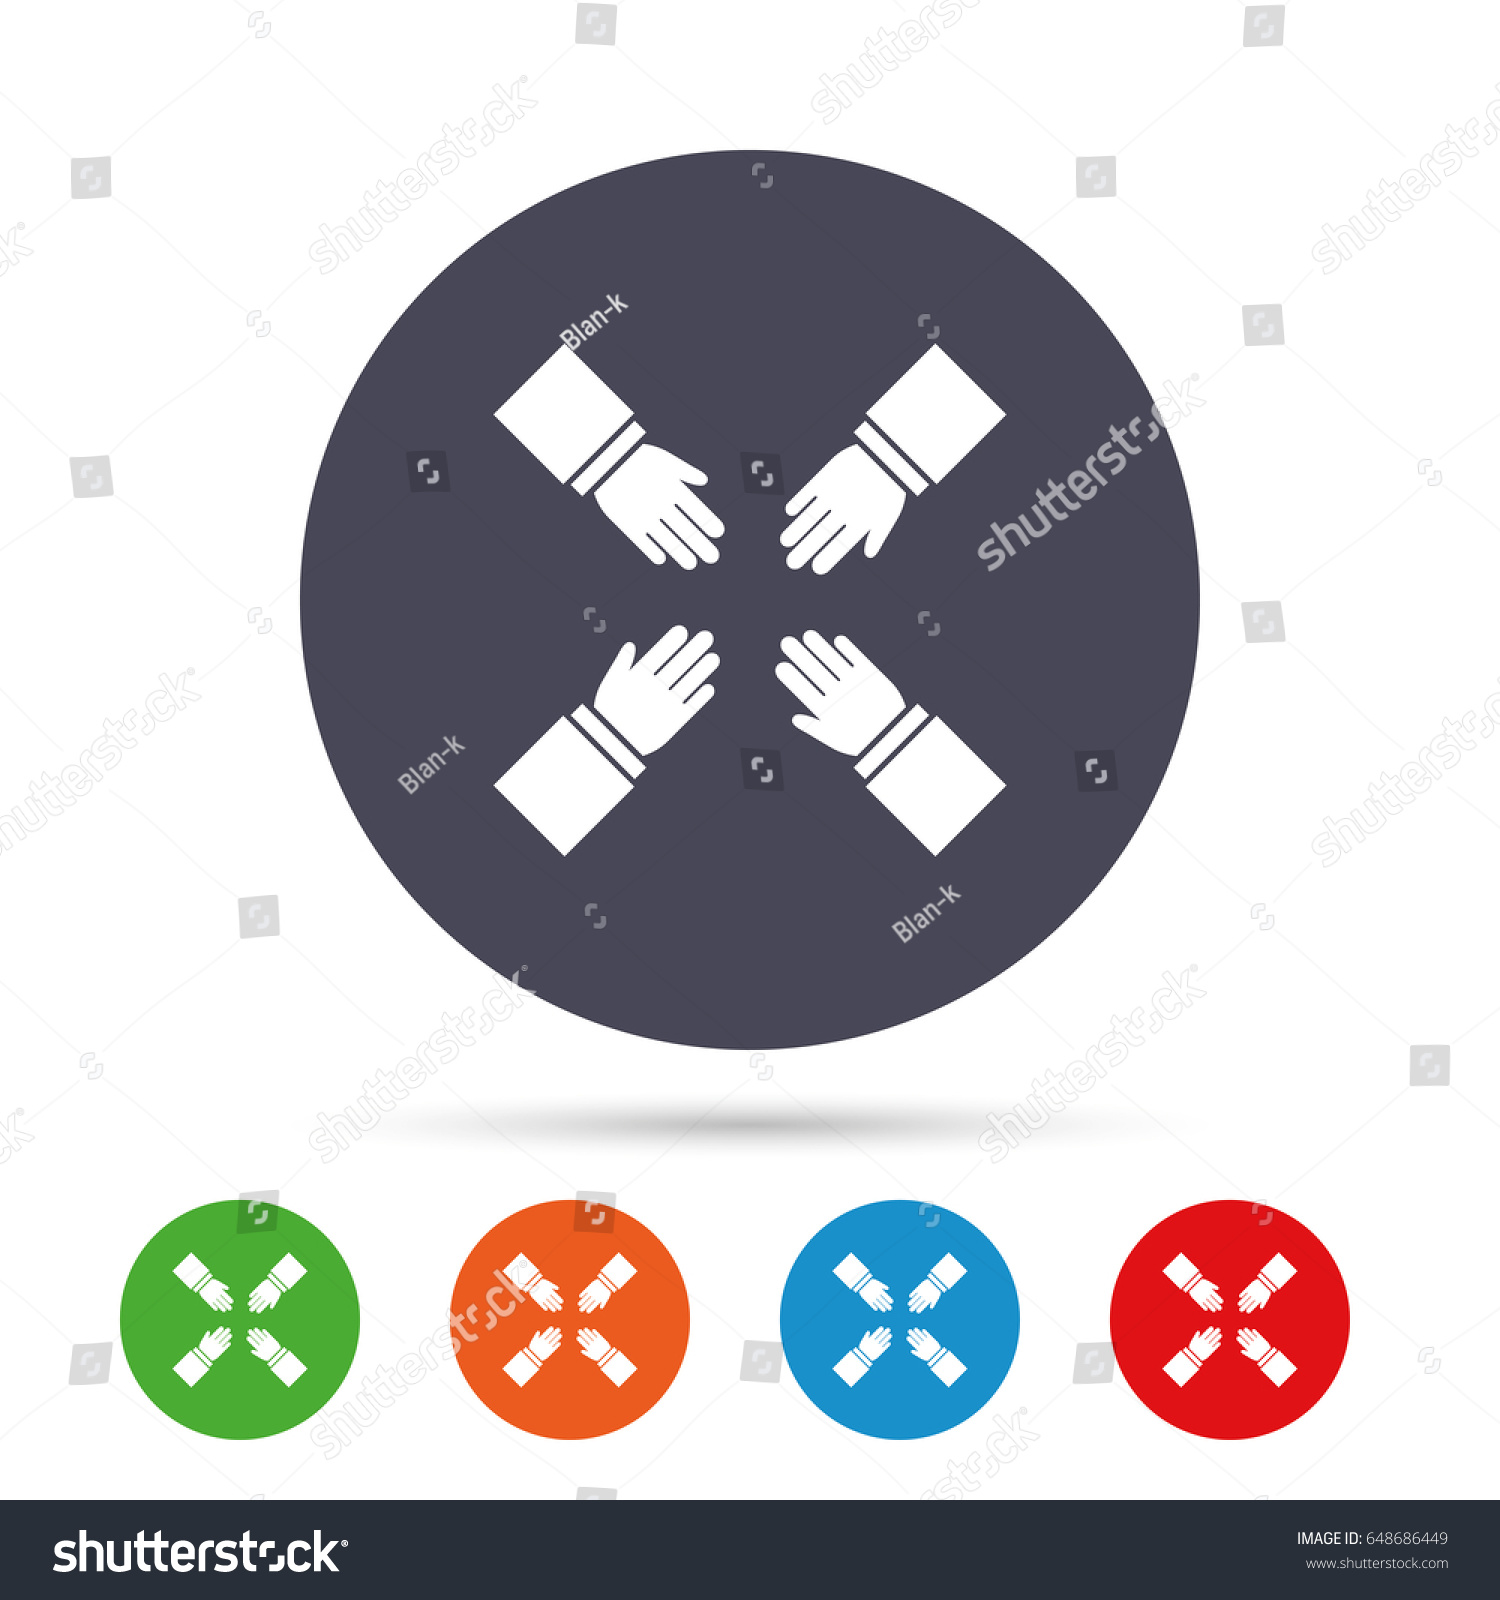 teamwork sign icon helping hands symbol stock vector royalty free 648686449 shutterstock